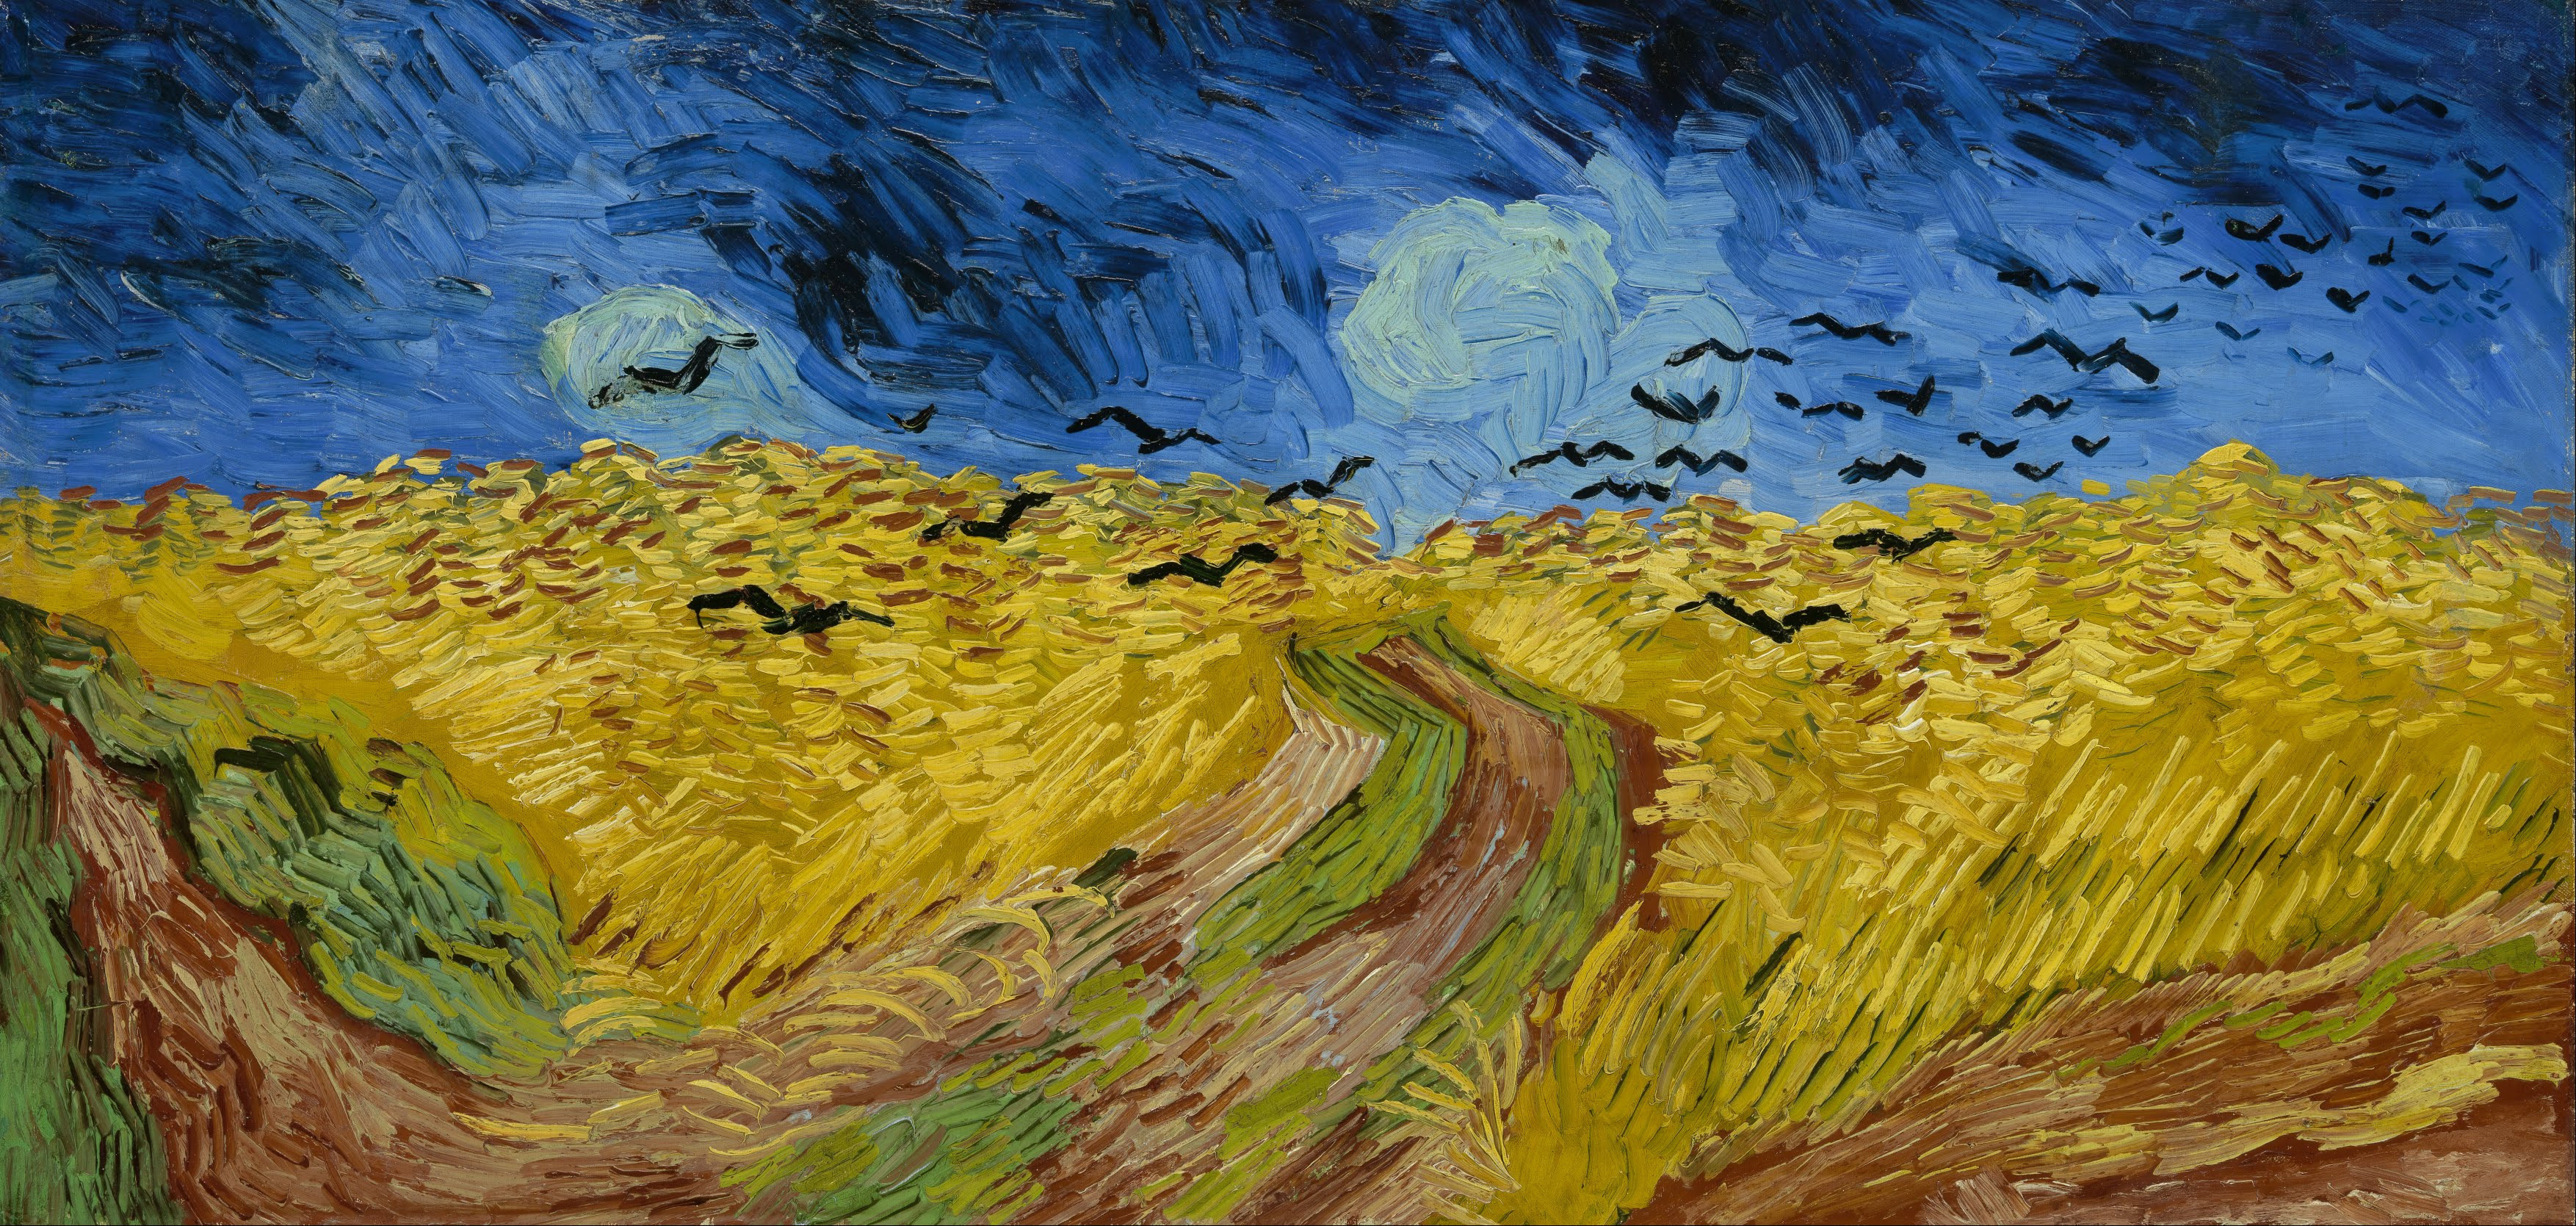 3508x1669  Van Gogh Museum, Amsterdam. An expansive painting of a  wheatfield, with a footpath going through the centre underneath dark